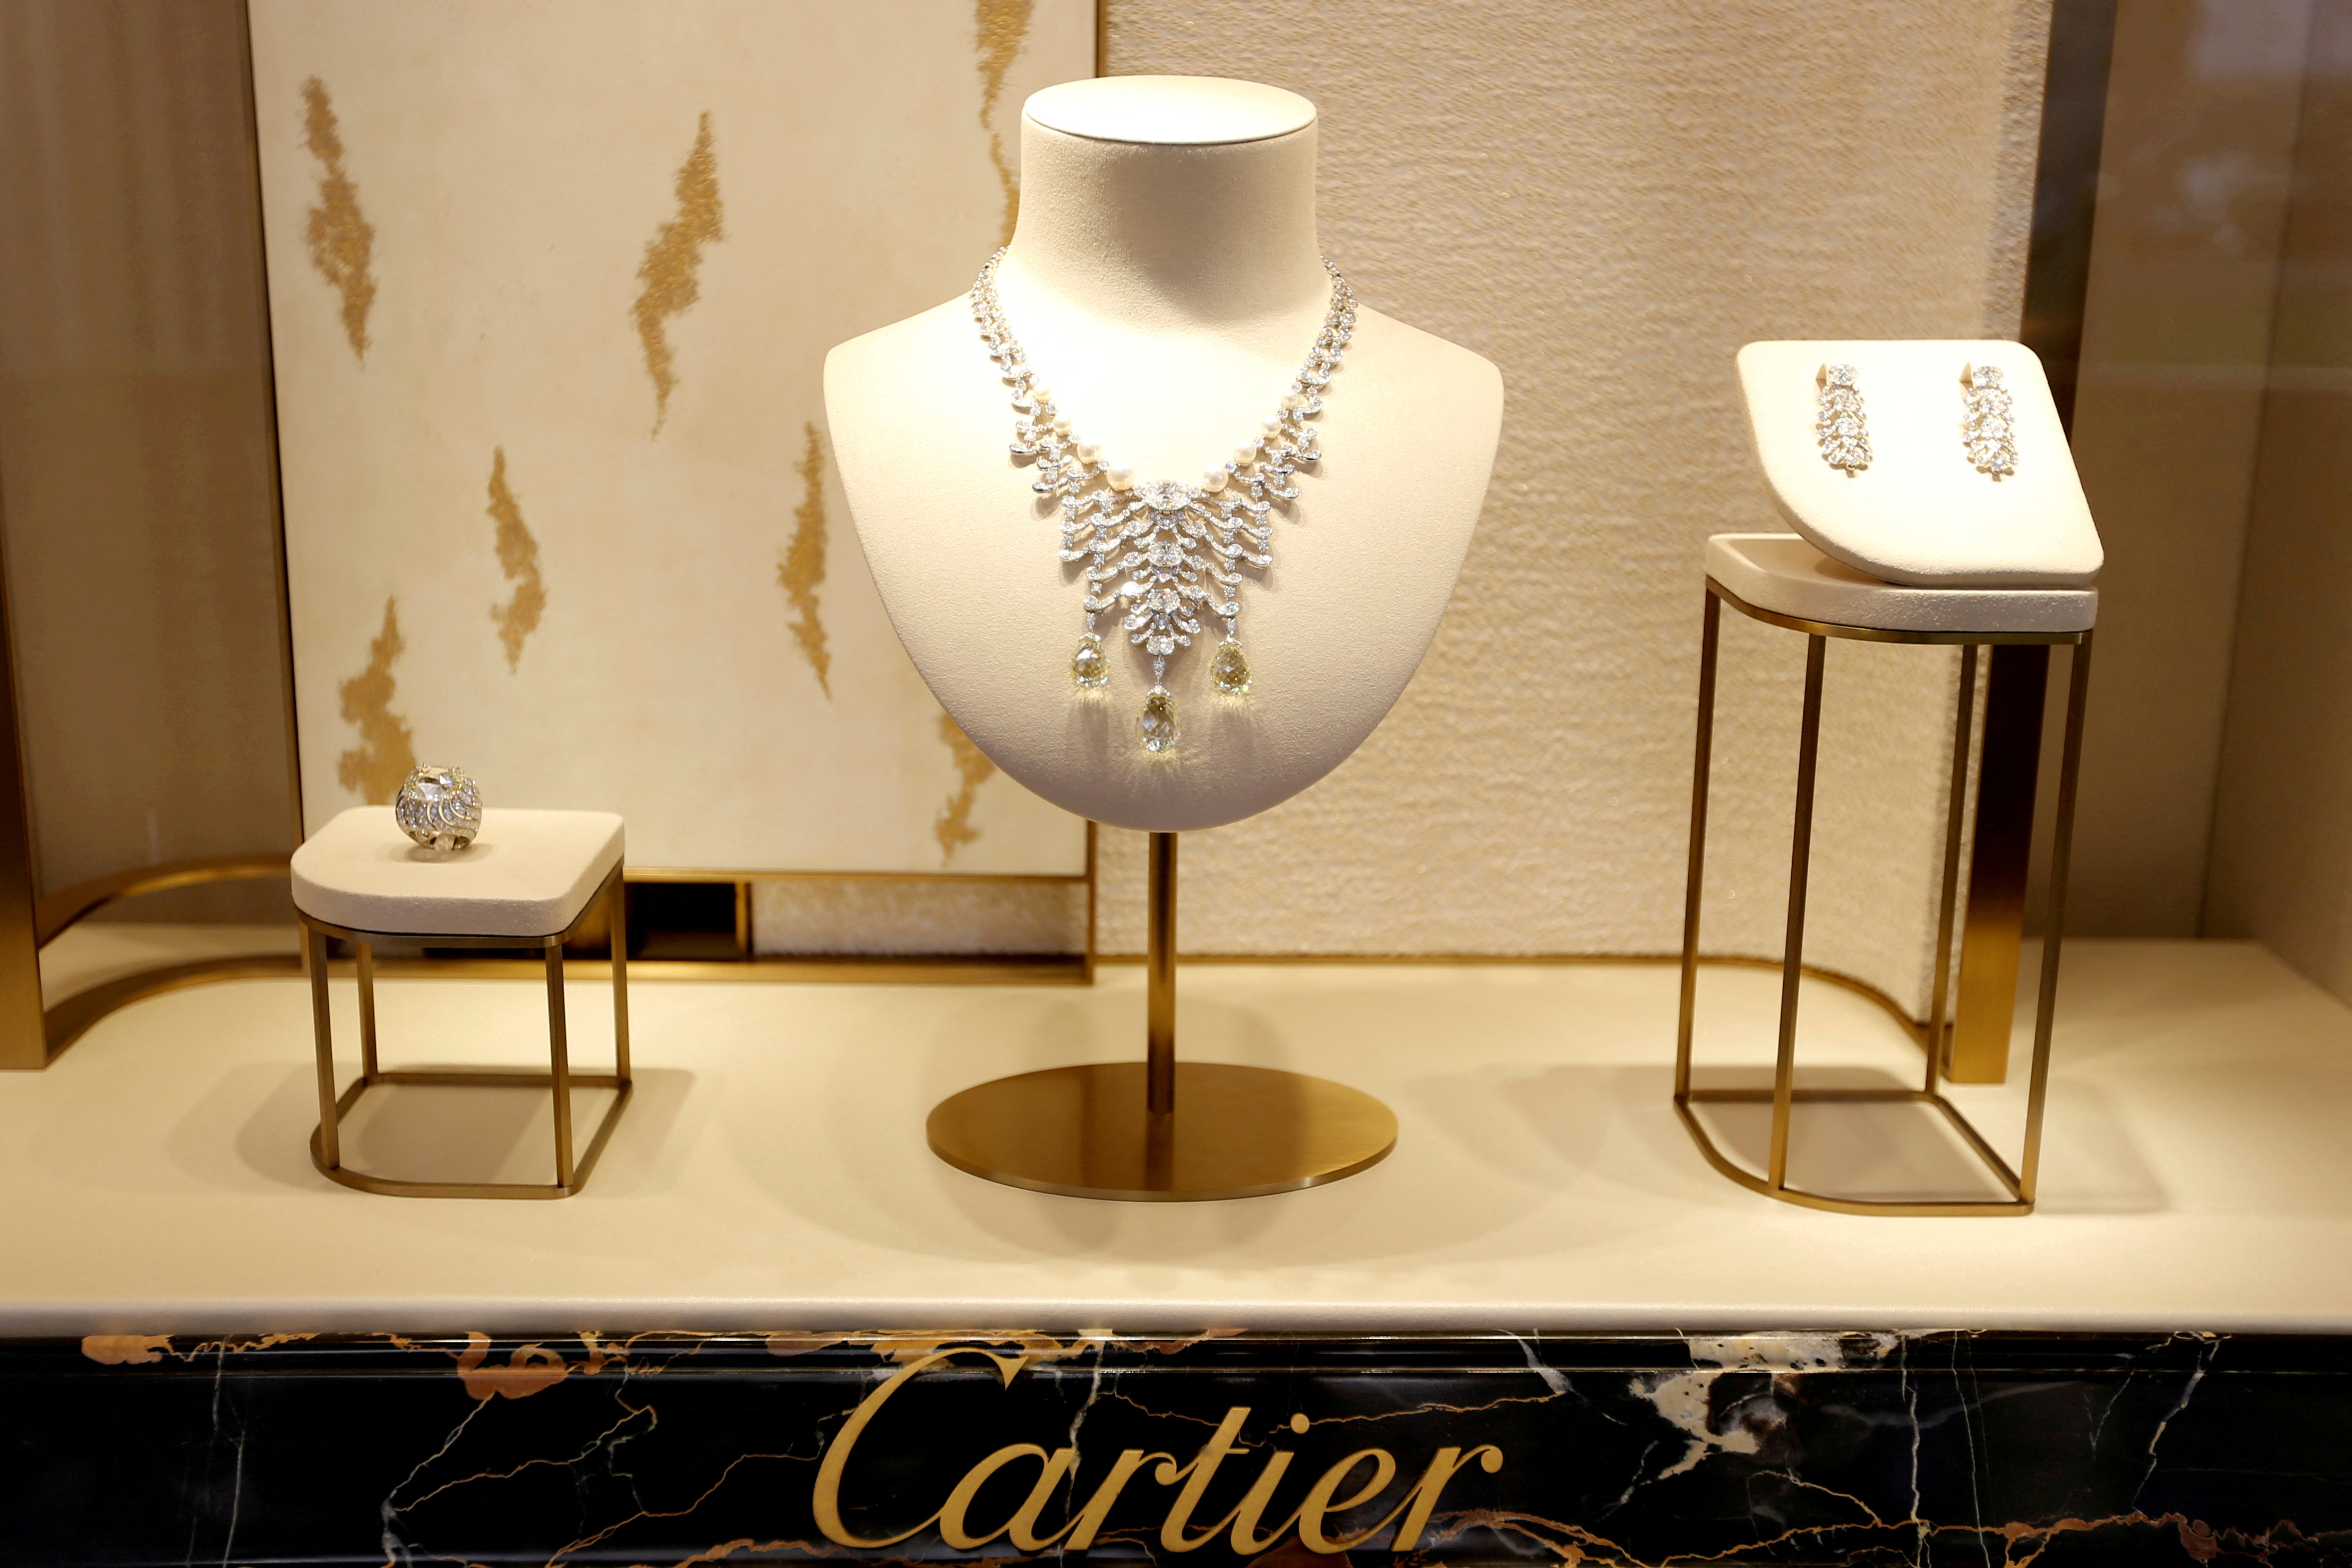 High jewellery are displayed at luxury goods maker Cartier store on Place Vendome in Paris